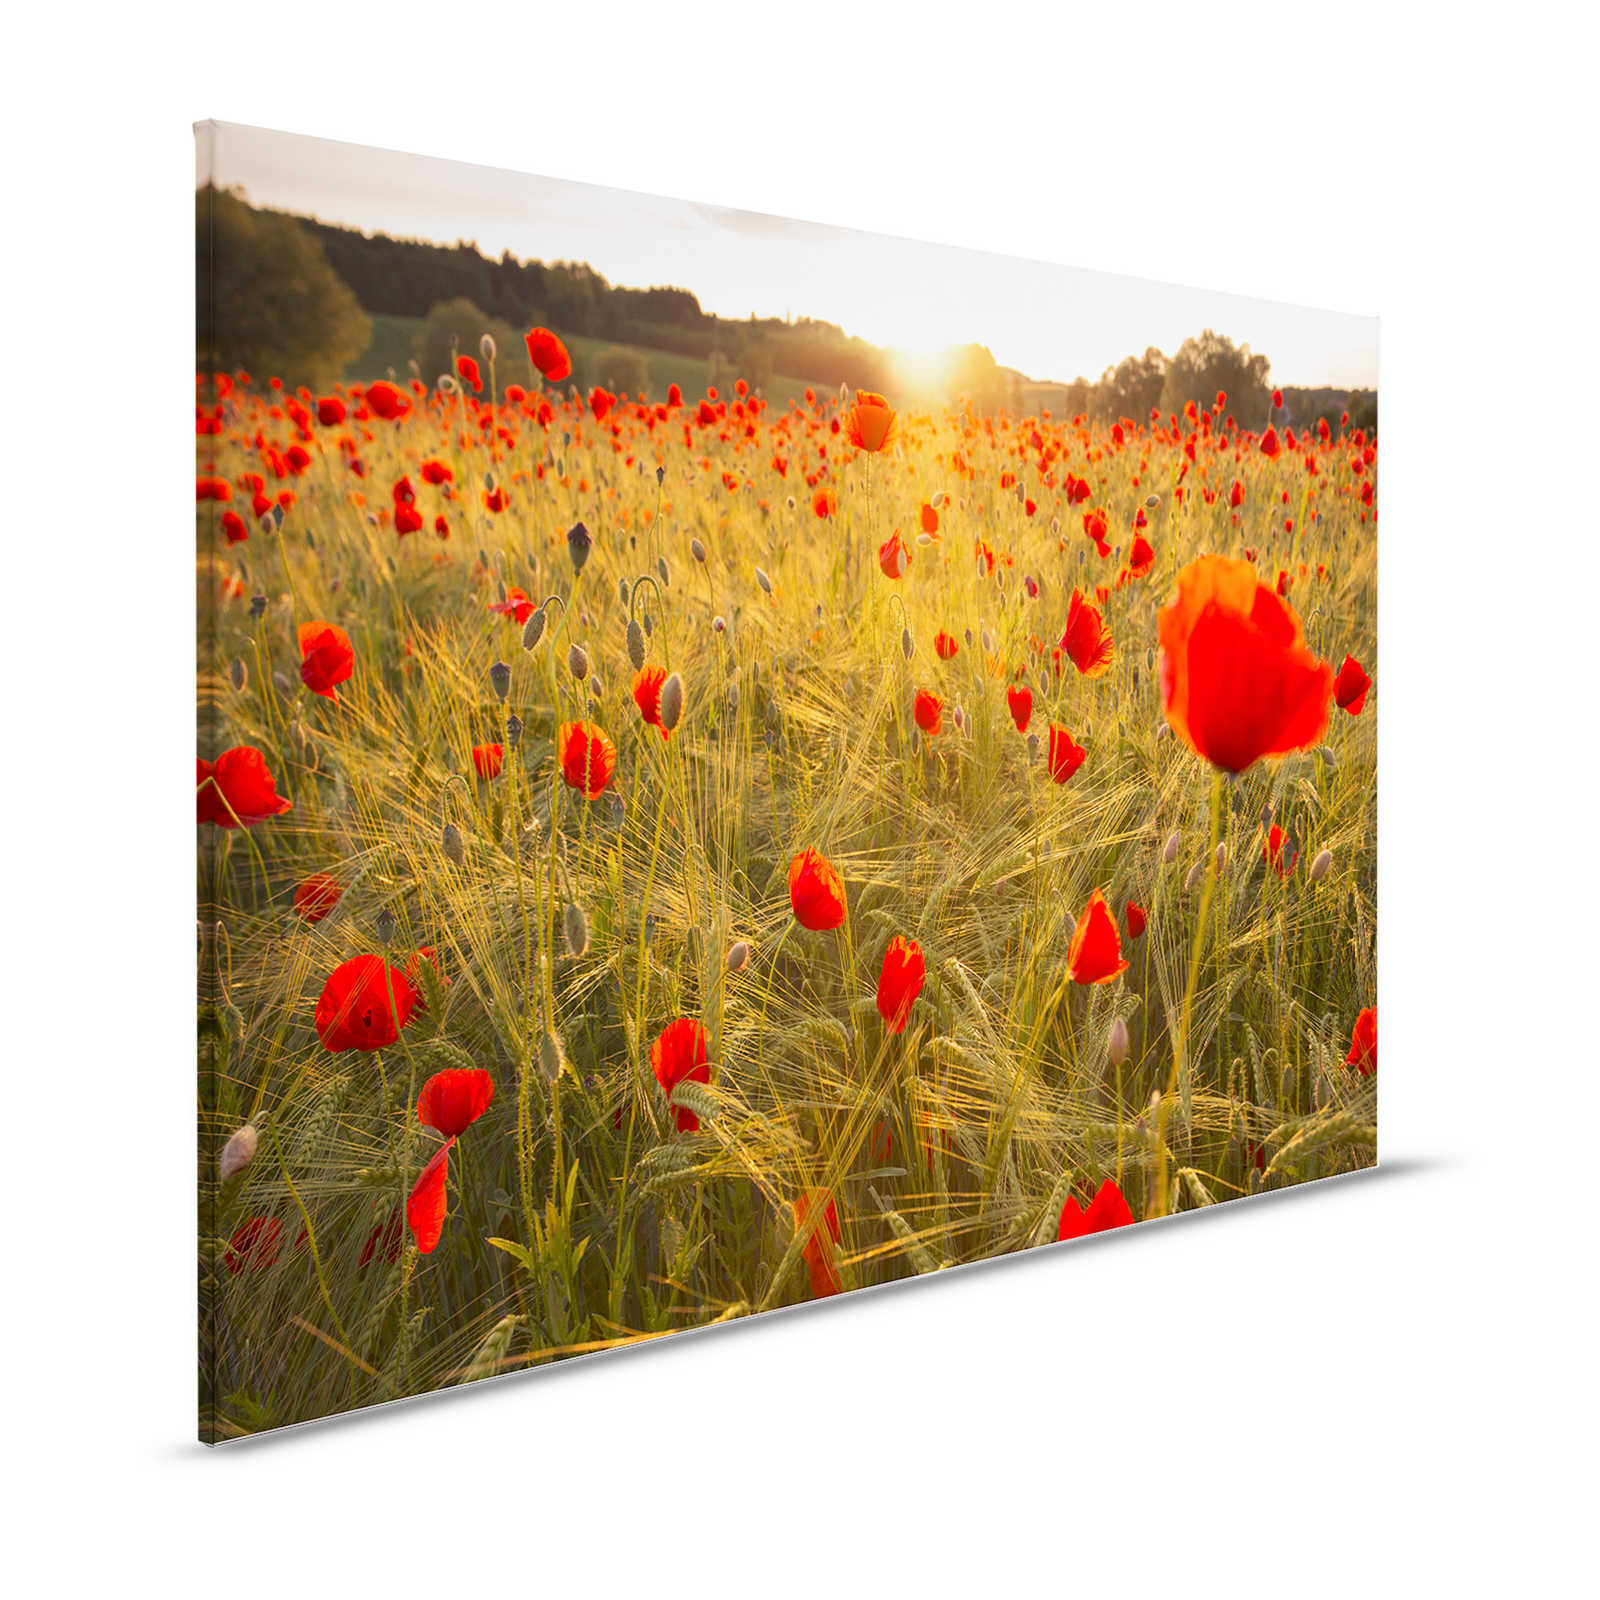 Poppy Meadow Canvas Painting at Sunrise - 1.20 m x 0.80 m
